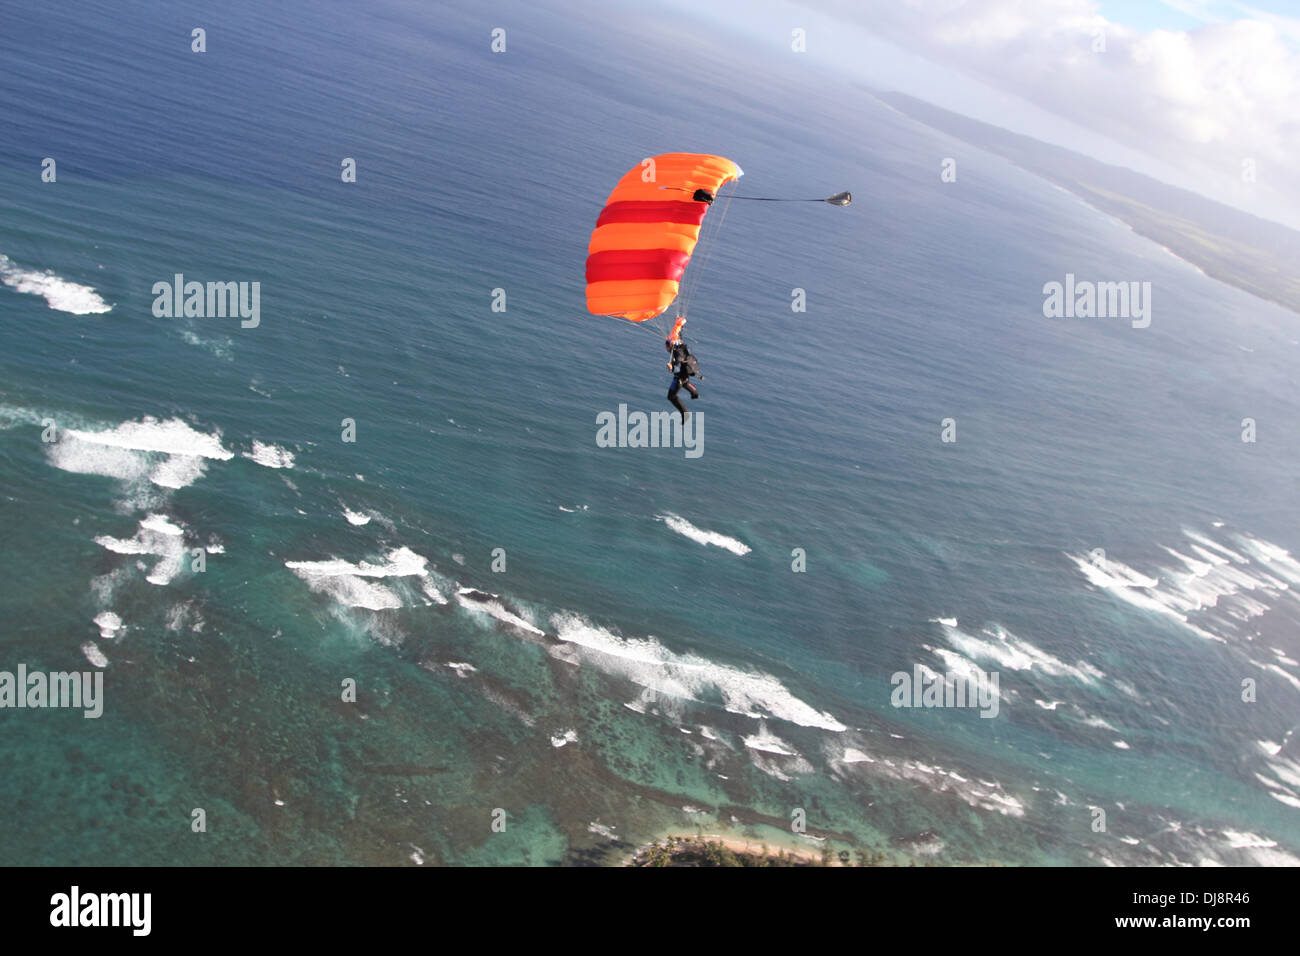 Skydiver under canopy is flying high in the sky over clouds into direction shore line. Soon she will land save on the beach. Stock Photo